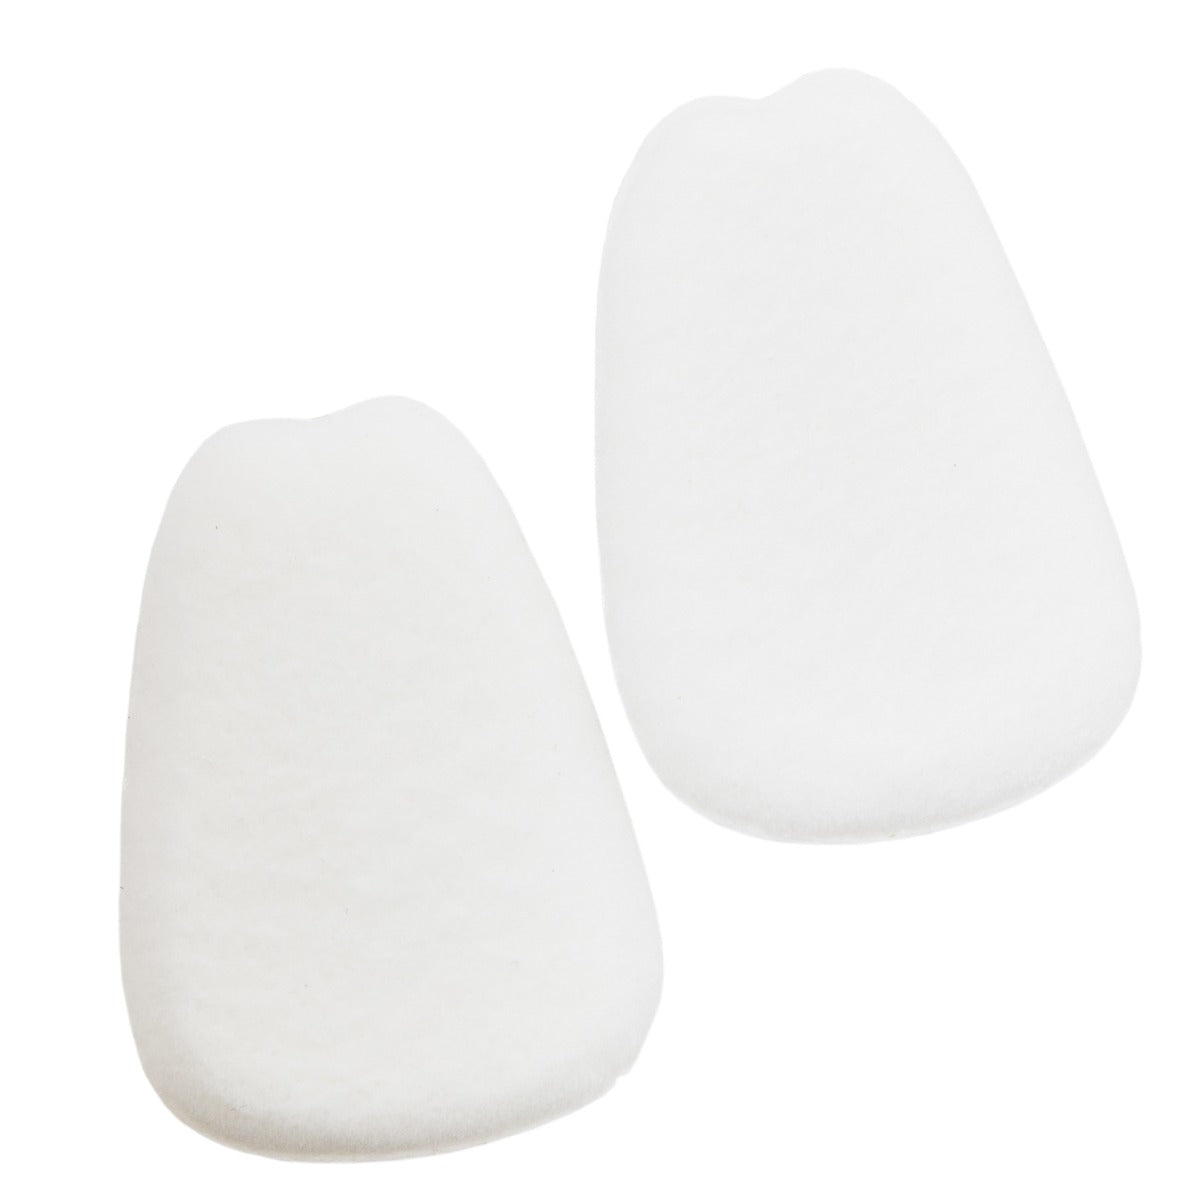 Two Large Tongue Pads by KirbyAllison.com on a white surface for cushioning leather dress shoes.